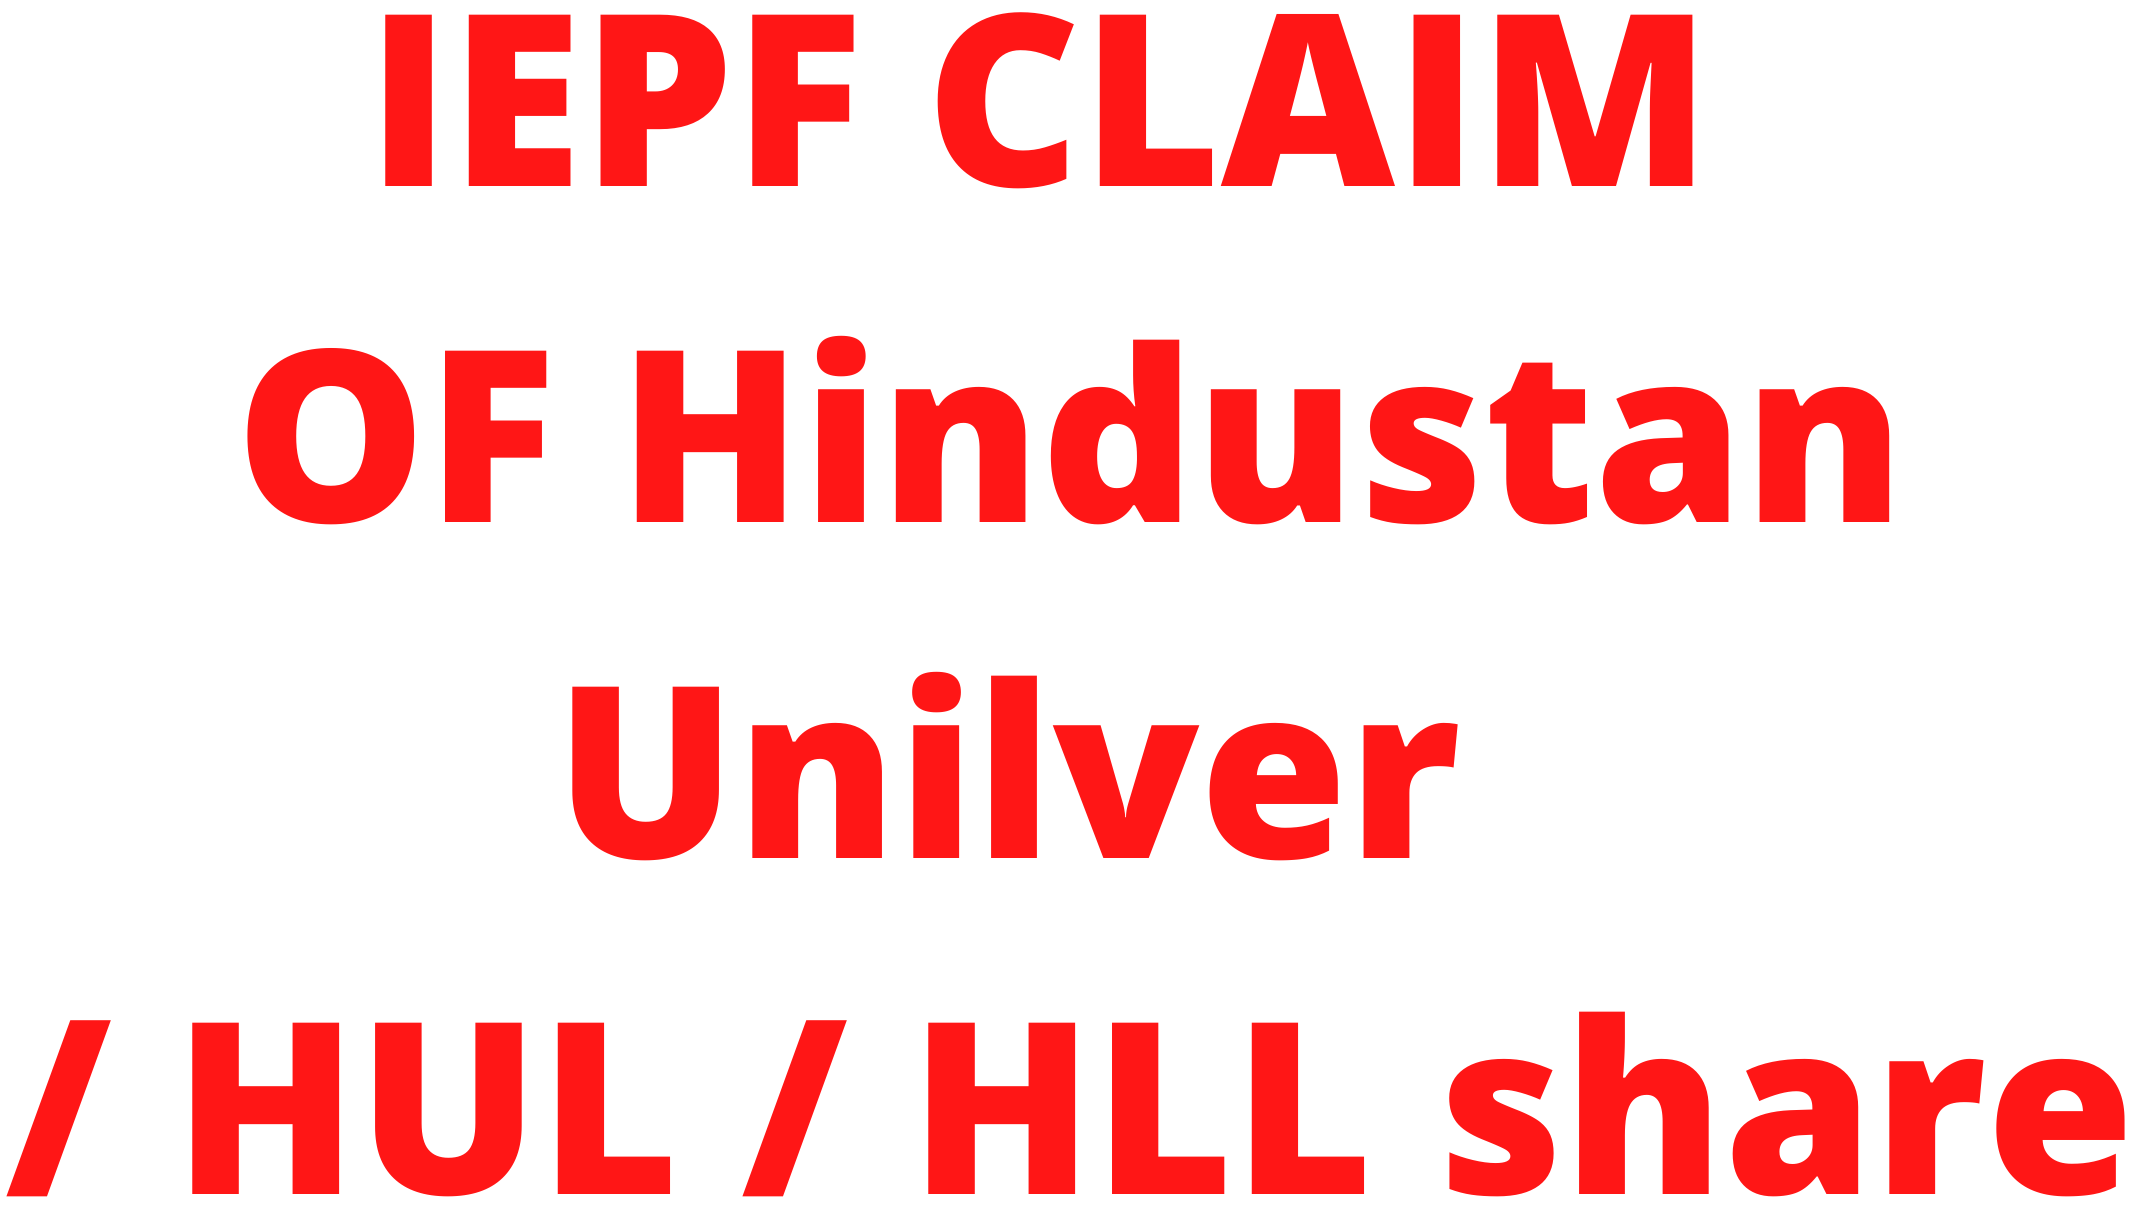 IEPF claim or IEPF refund of  HINDUSTAN UNILEVER LTD / HUL (EARLIER KNOWN AS HLL)  shares / unclaimed dividend of HINDUSTAN UNILEVER LTD / HUL shares?